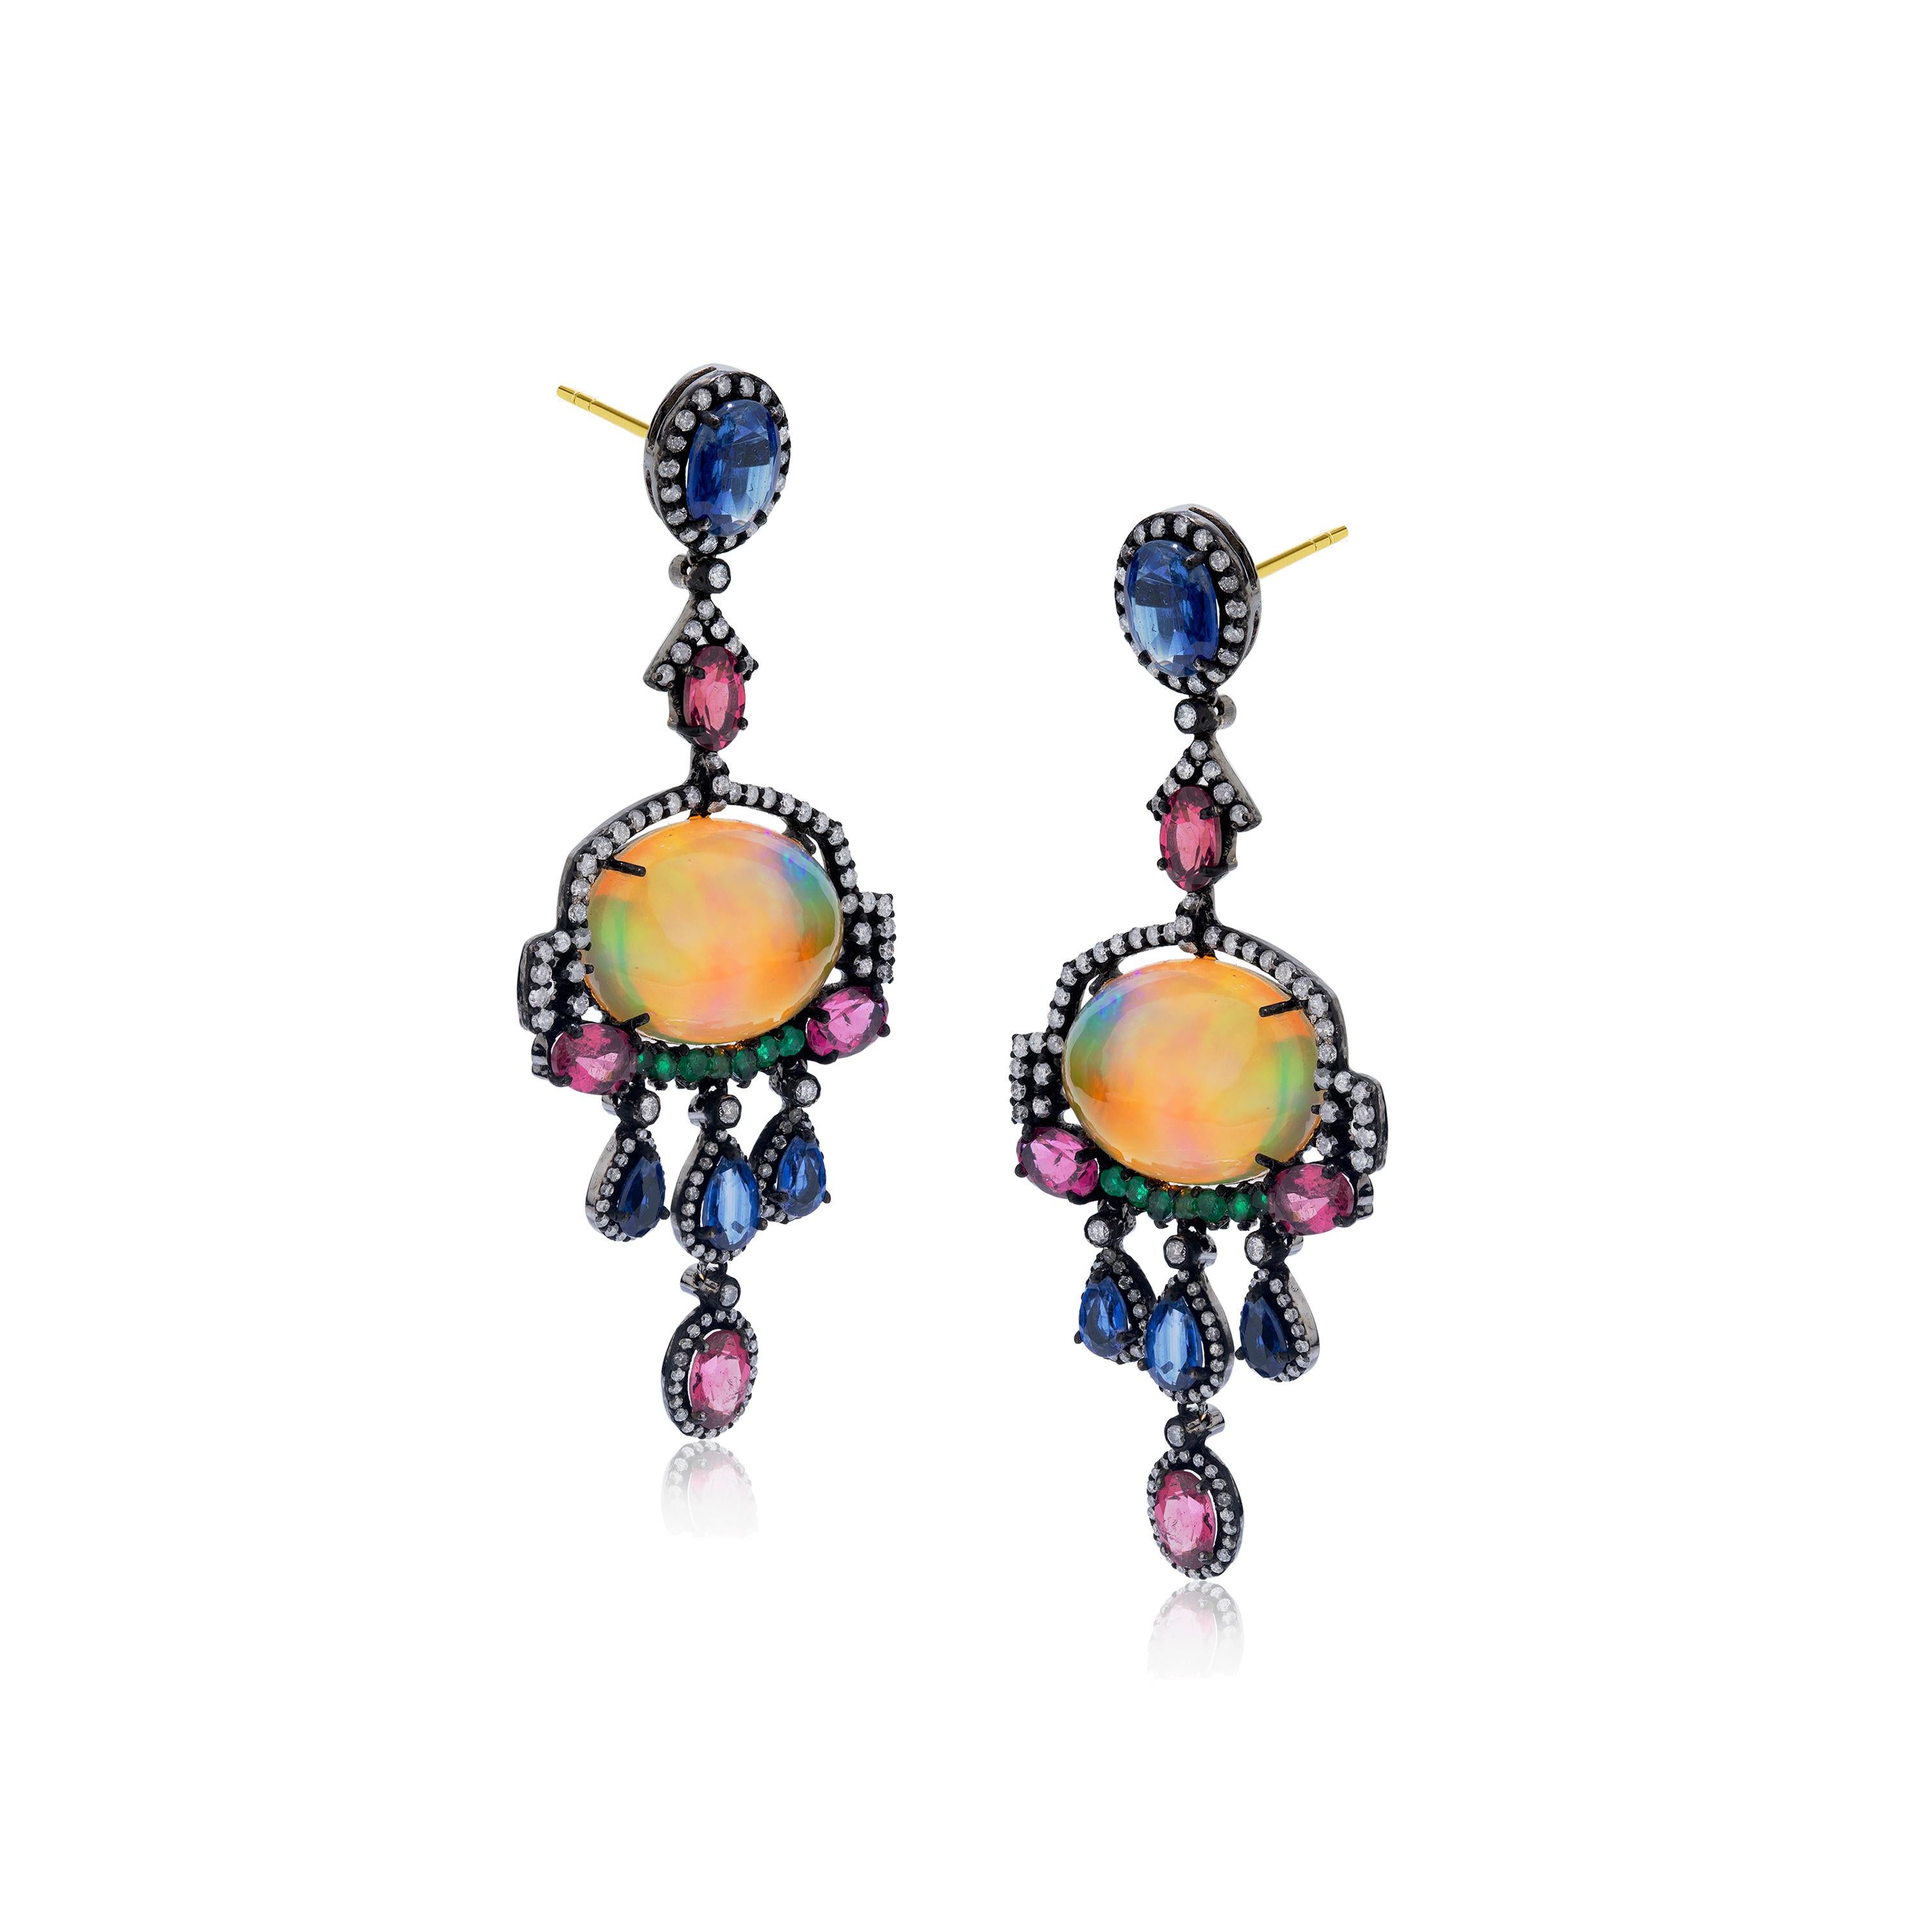 This fascinating multi stone Victorian earrings from Gemistry are carved of 18K/925 Black Rhodium Sterling Silver. The earpieces are well embellished with mix diamonds weighing 1.78 Cts. Multiple gemstones like round cut emeralds, pink tourmaline